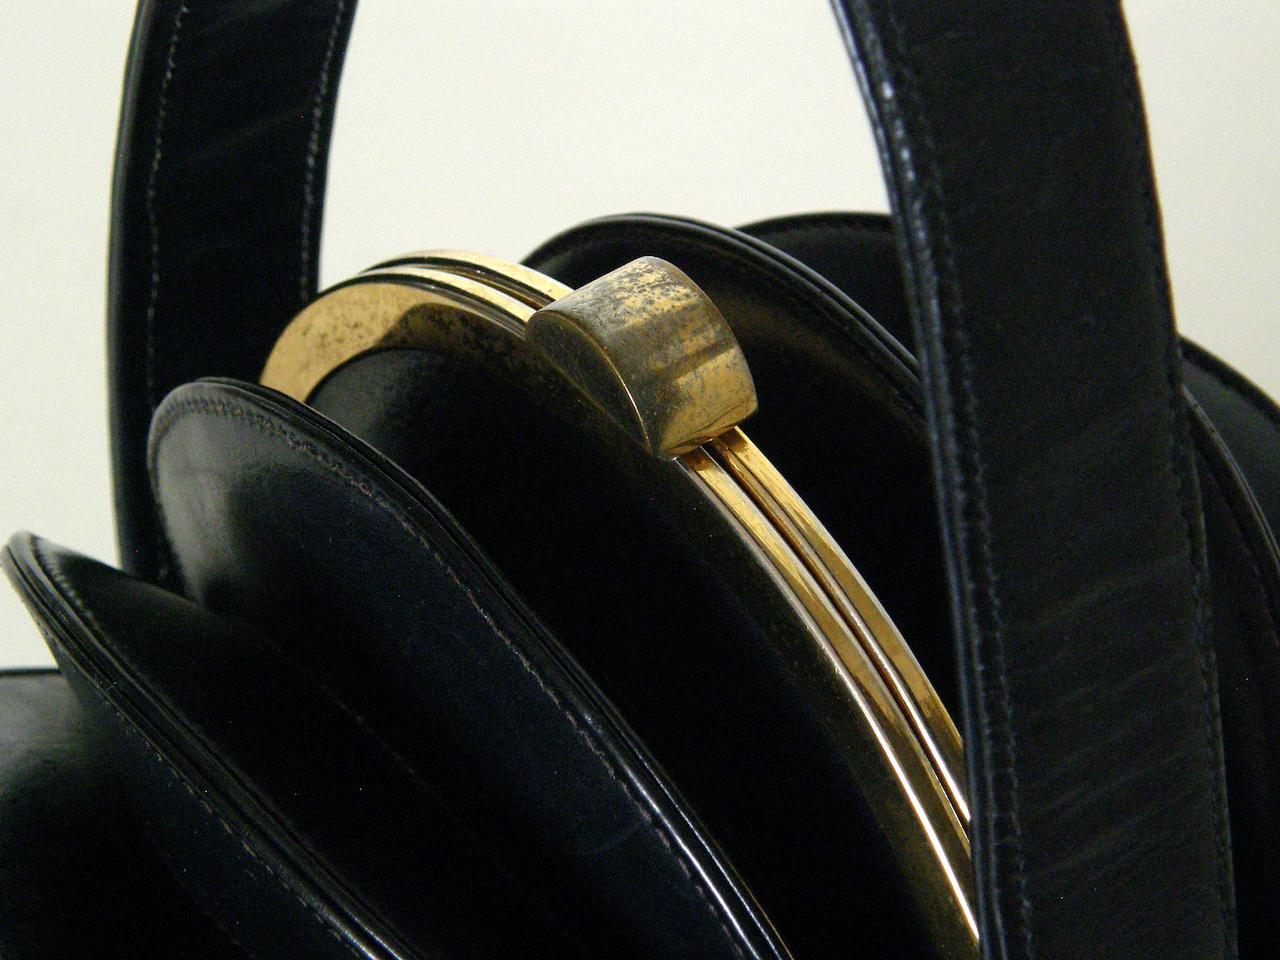 Women's Sculptural Midnight Blue Leather Accordion Top Handbag Patented in 1949 by Bogan